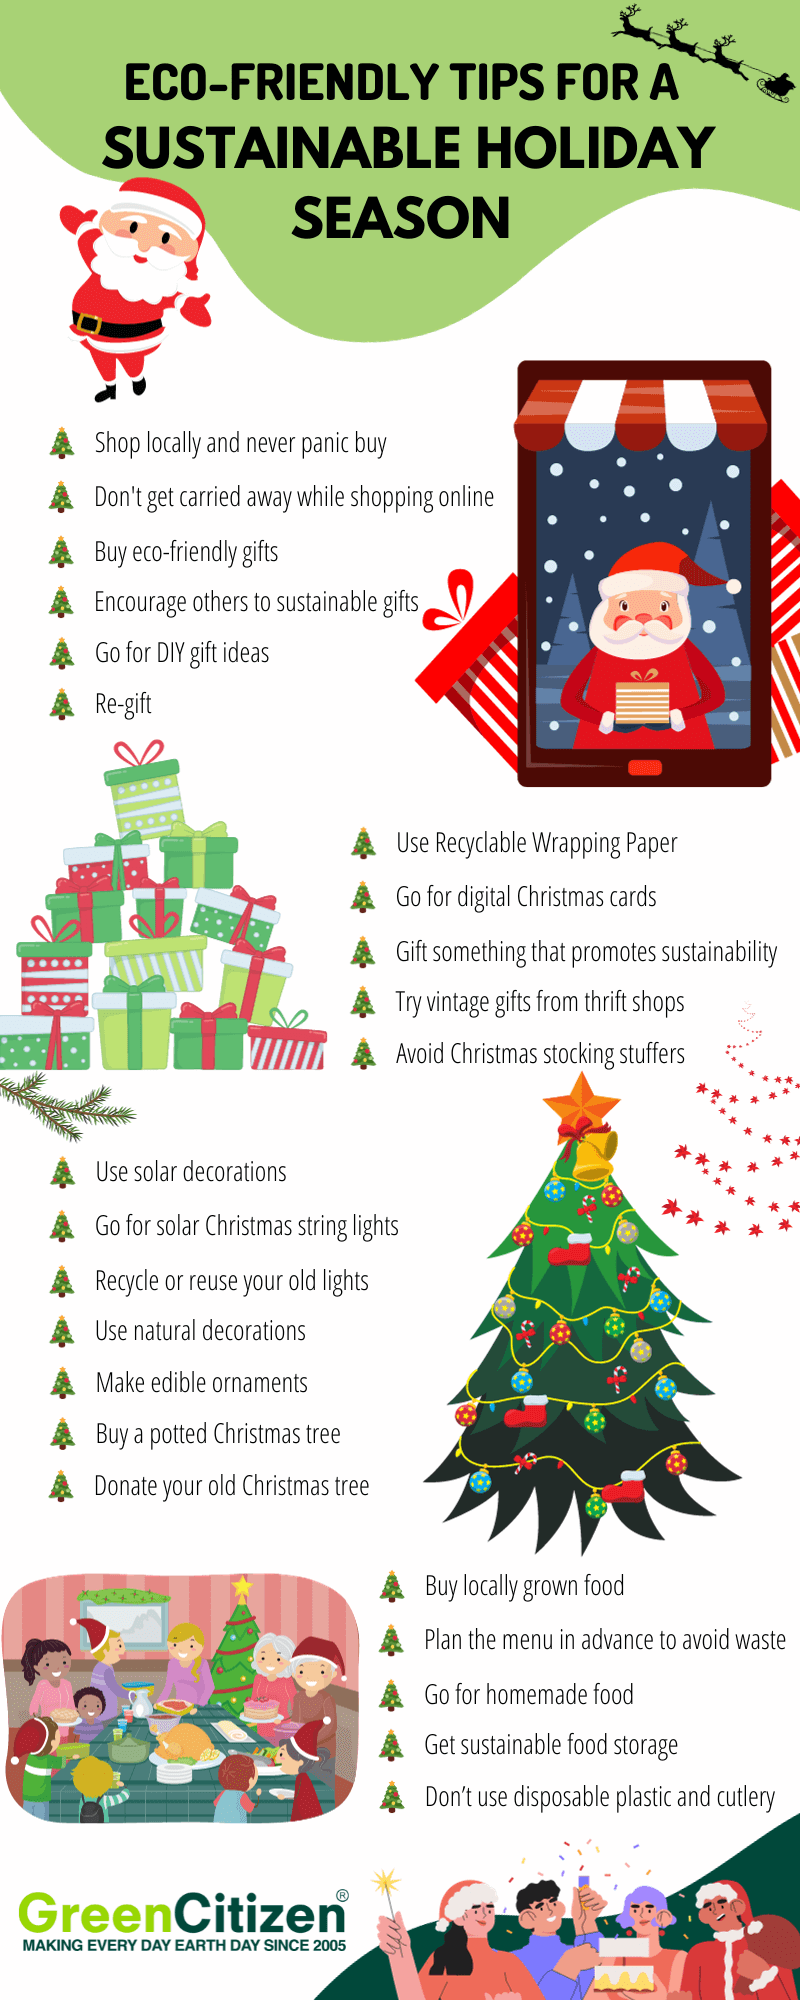 Sustainable Holiday Tips